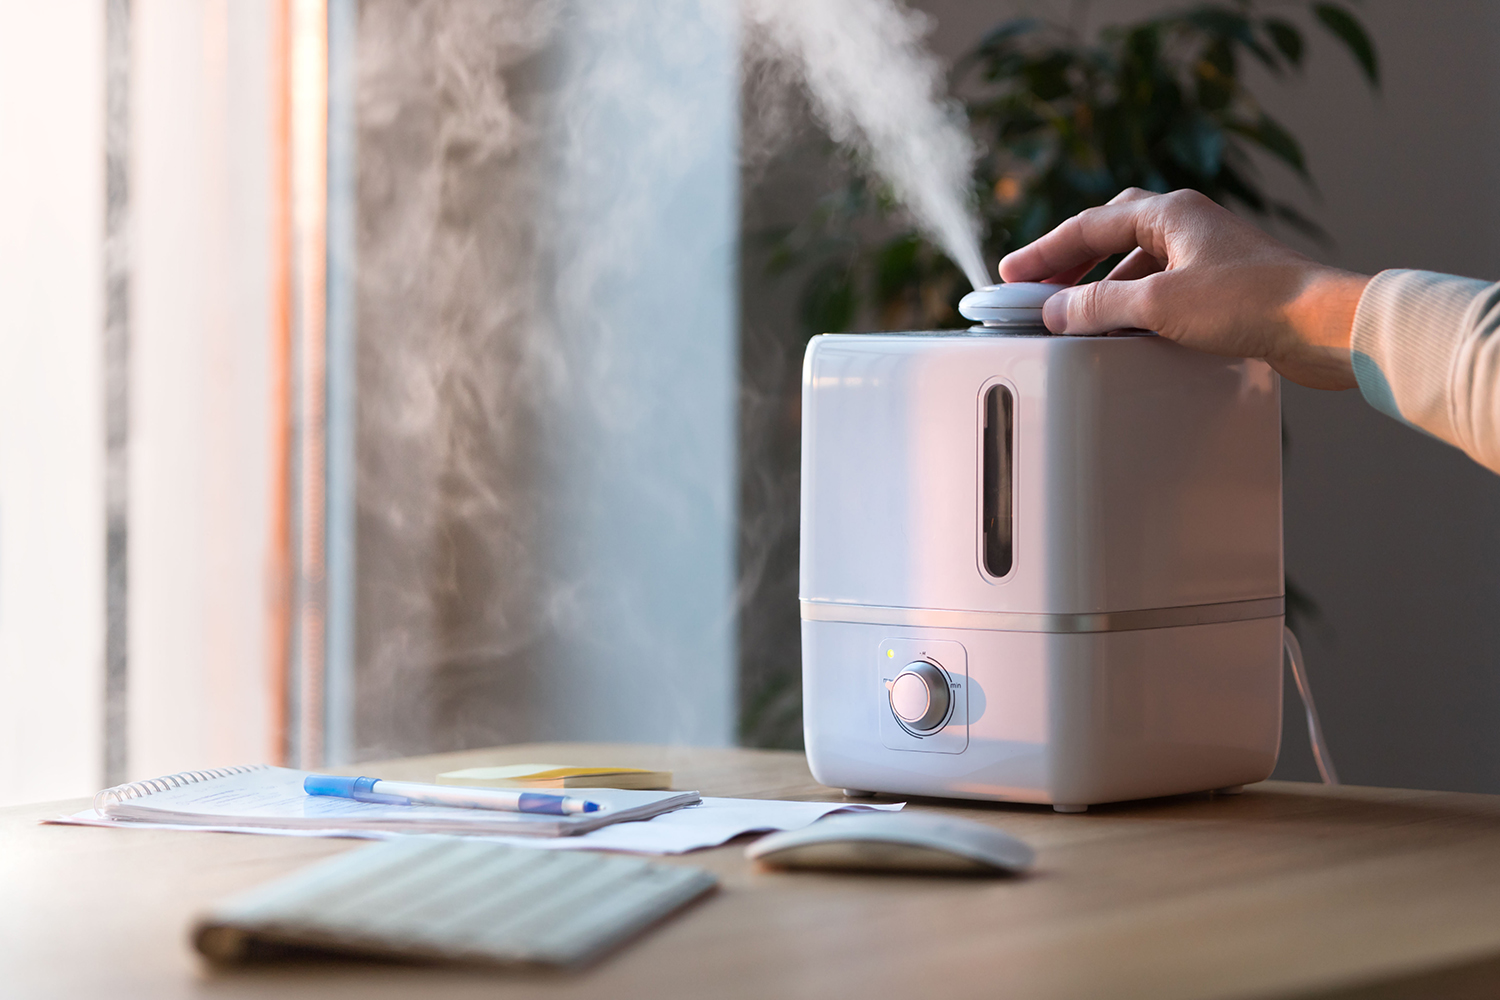 man-using-aroma-oil-diffuser-table-steam-from-air-humidifier-selective-focus.jpg